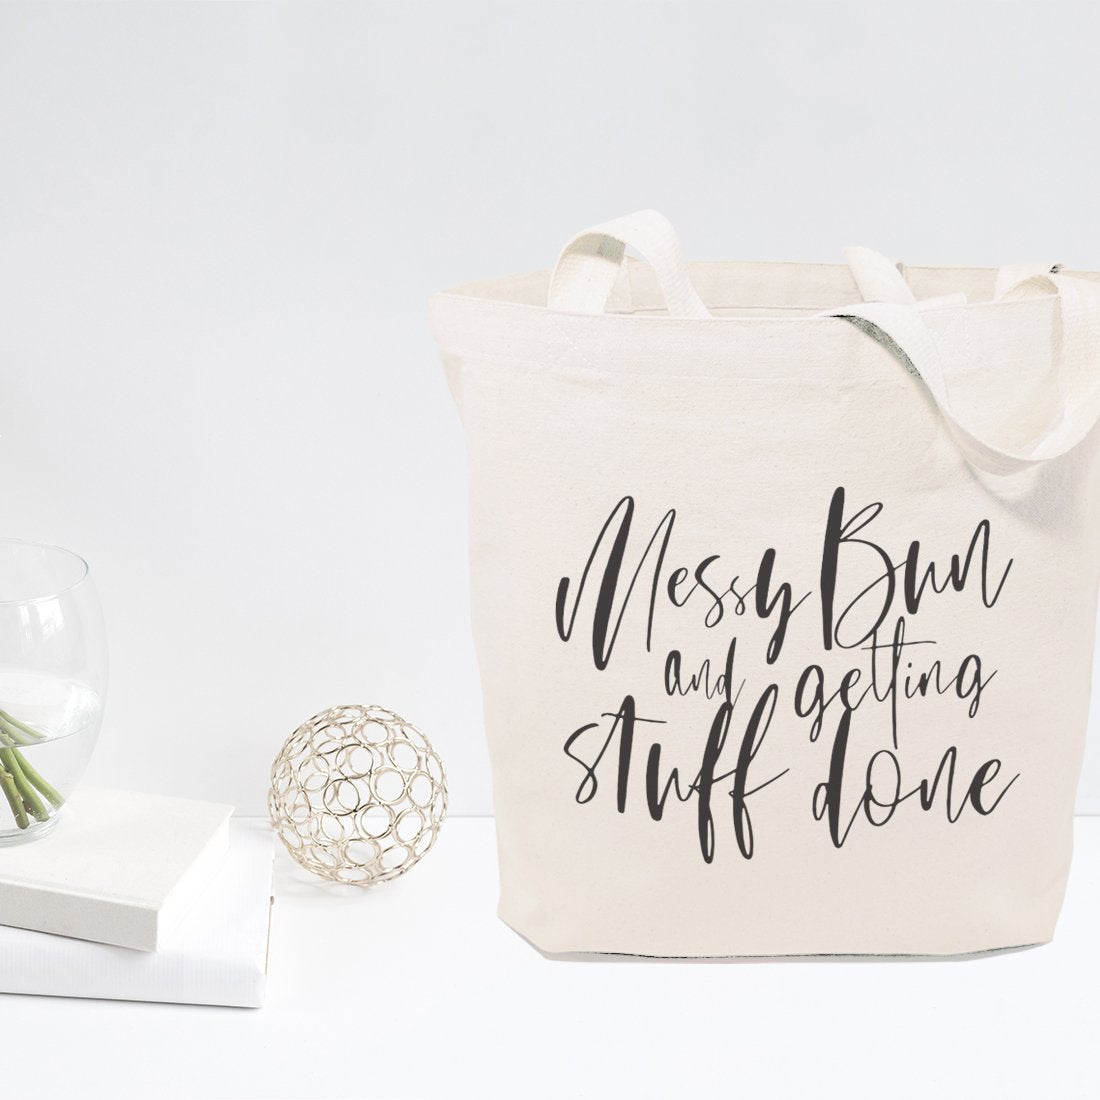 Canvas Daily Grind Tote - Cute Tote Bag - Talking Out of Turn Beach Wash Denim - Melt with You